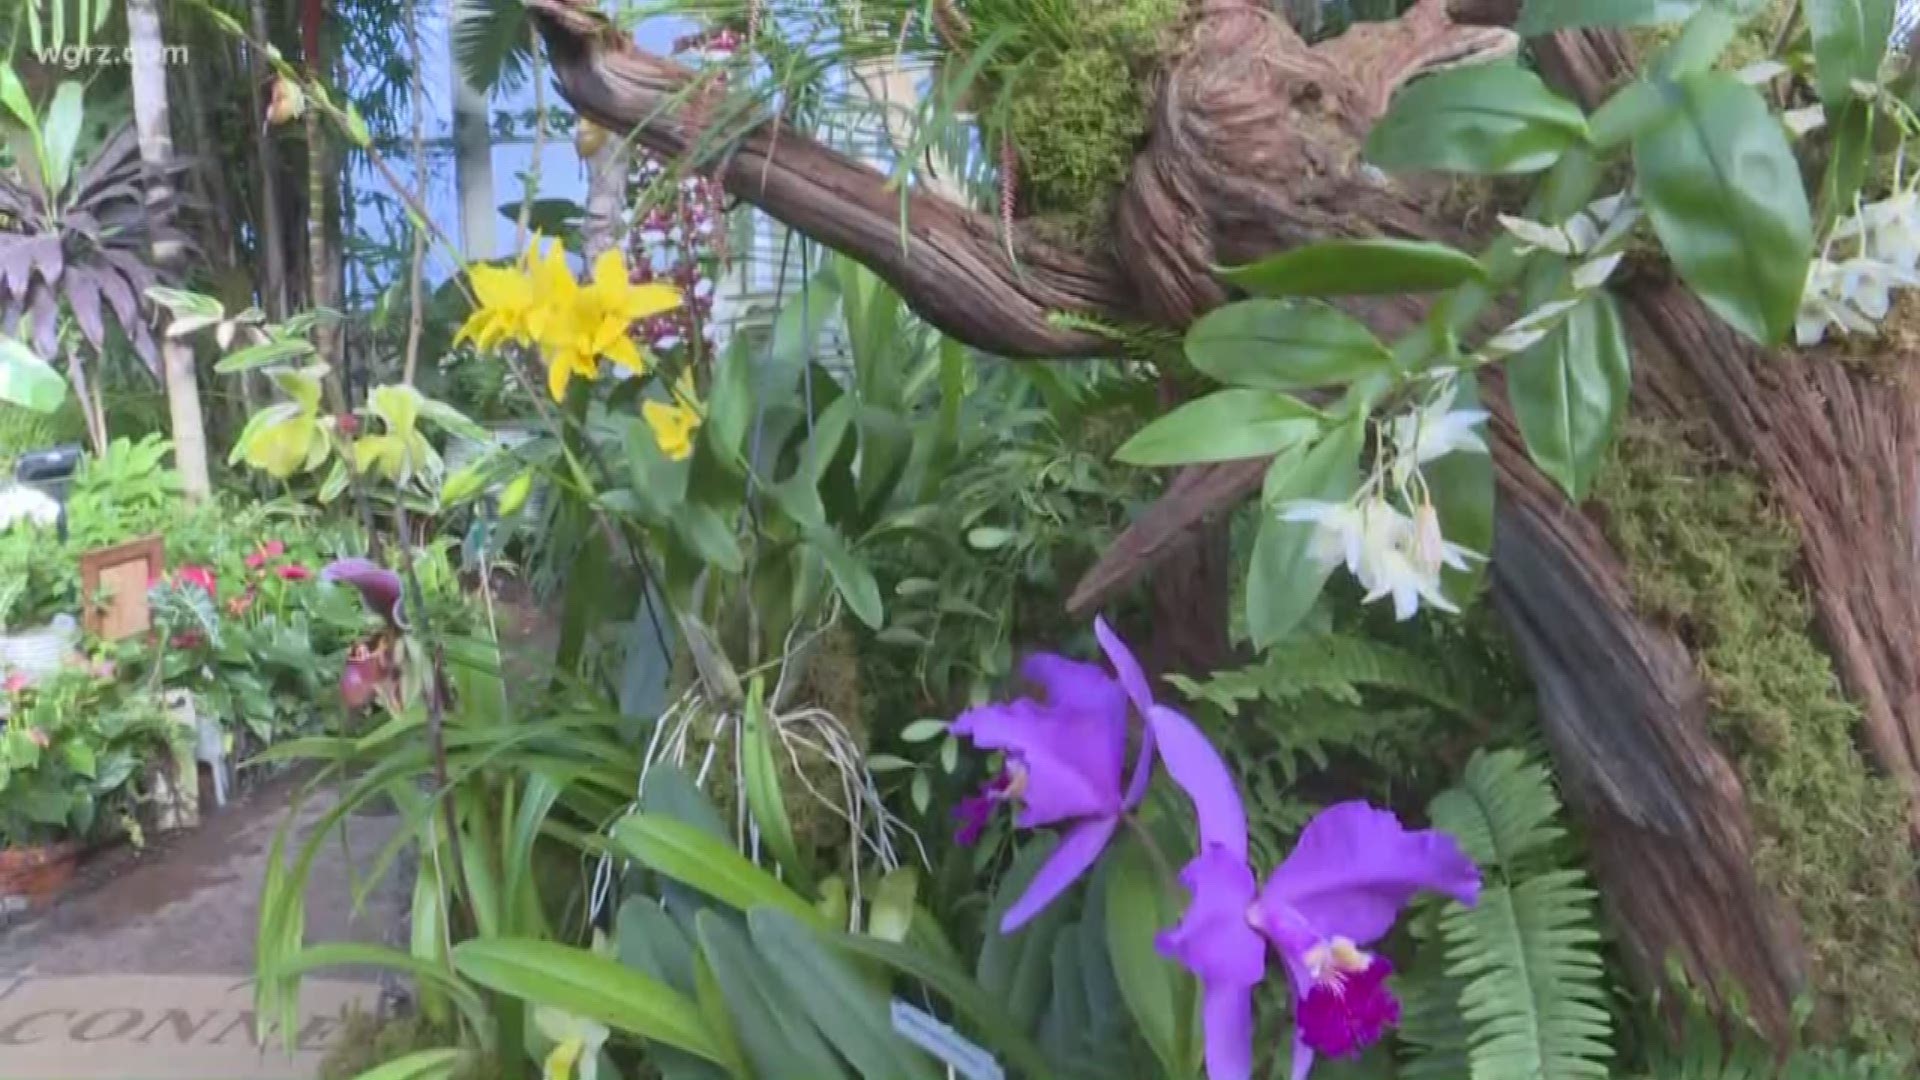 The Niagara Frontier Orchid Society is hosting its annual showcase, Orchids Under the Dome, at the Buffalo and Erie County Botanical Gardens.